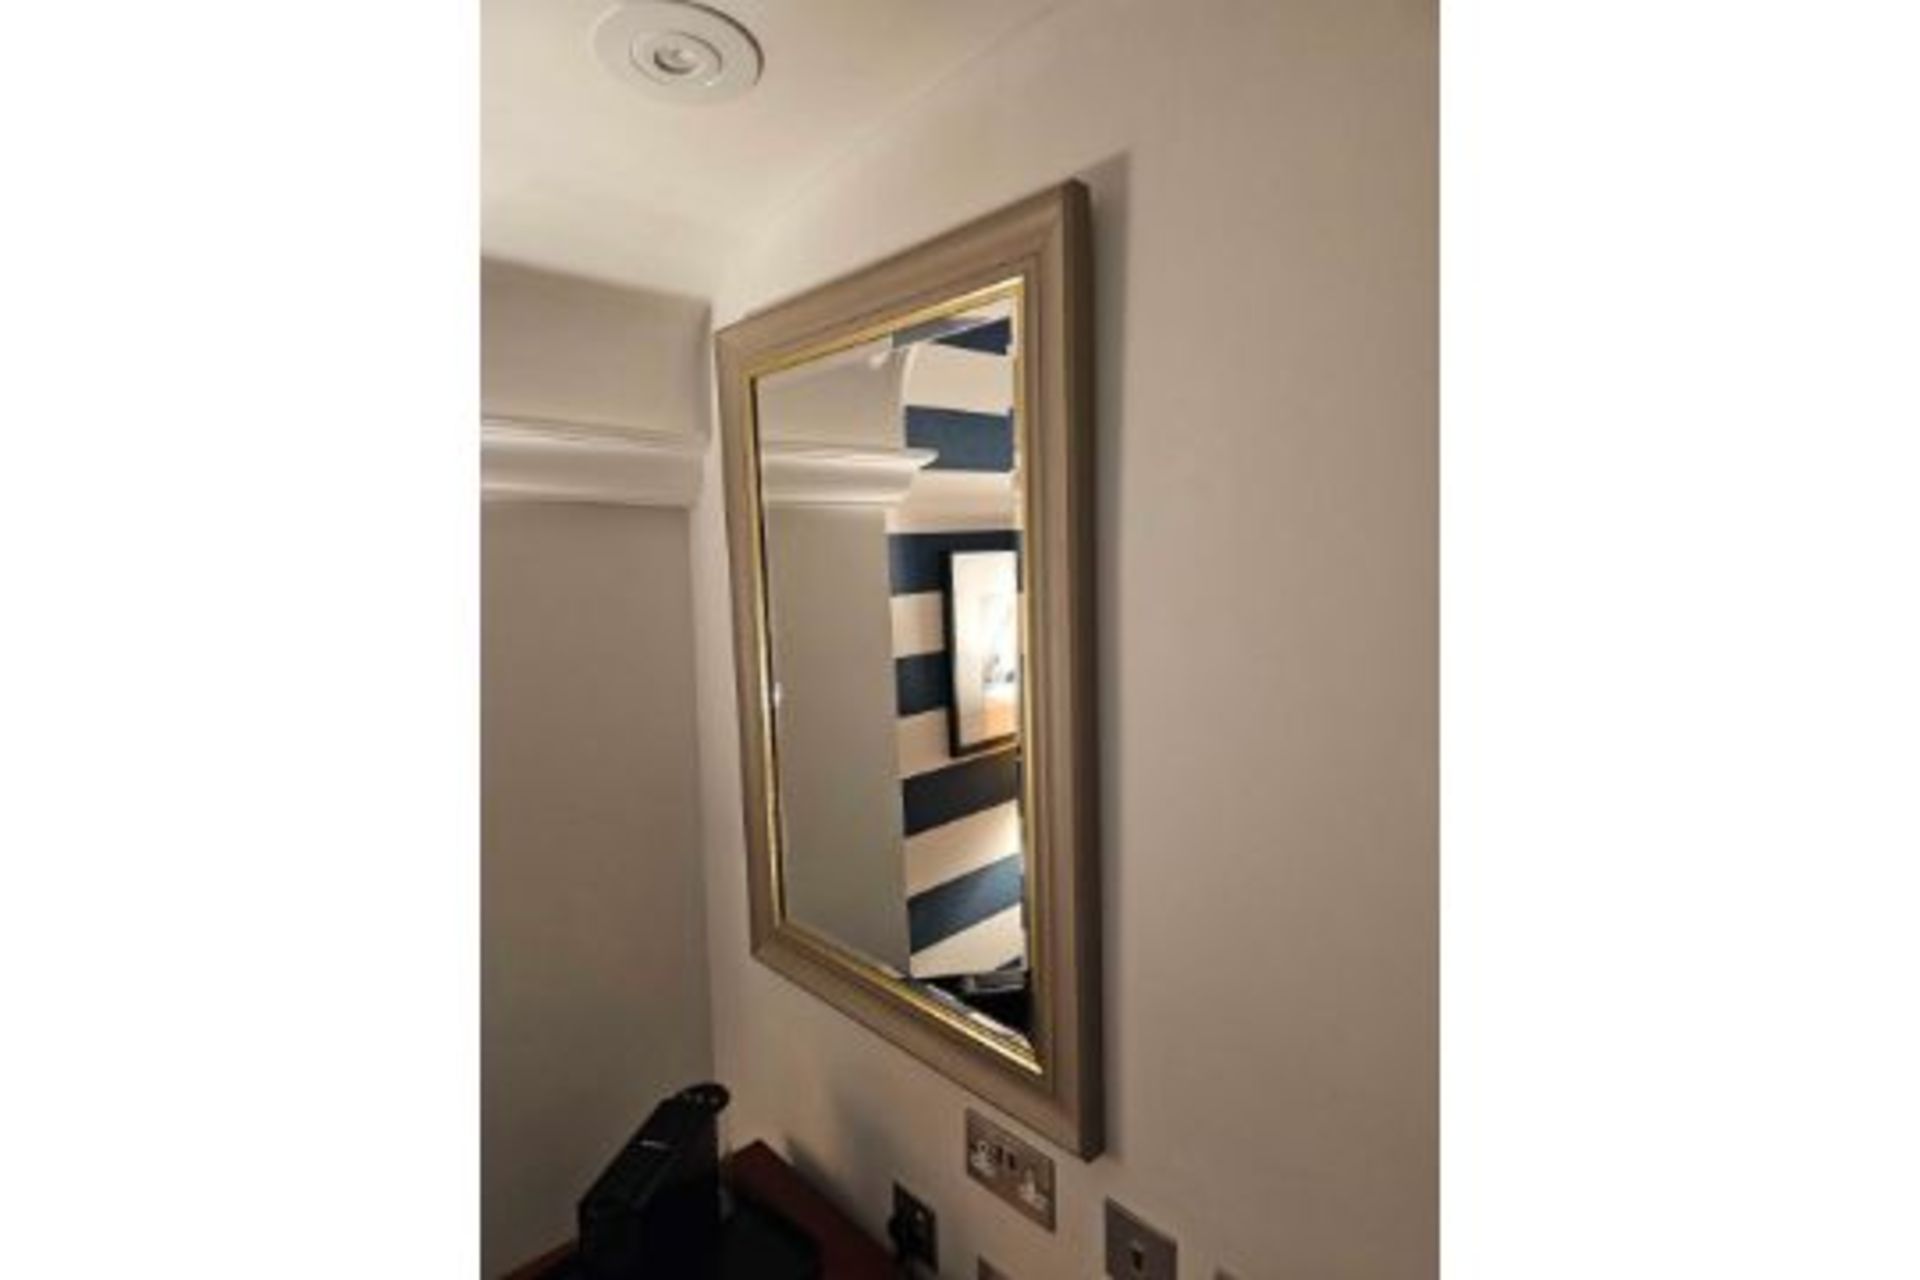 Modern Bevelled Accent Mirror Grey Timber Frame With Gold Trim Detailing 70 x 100cm